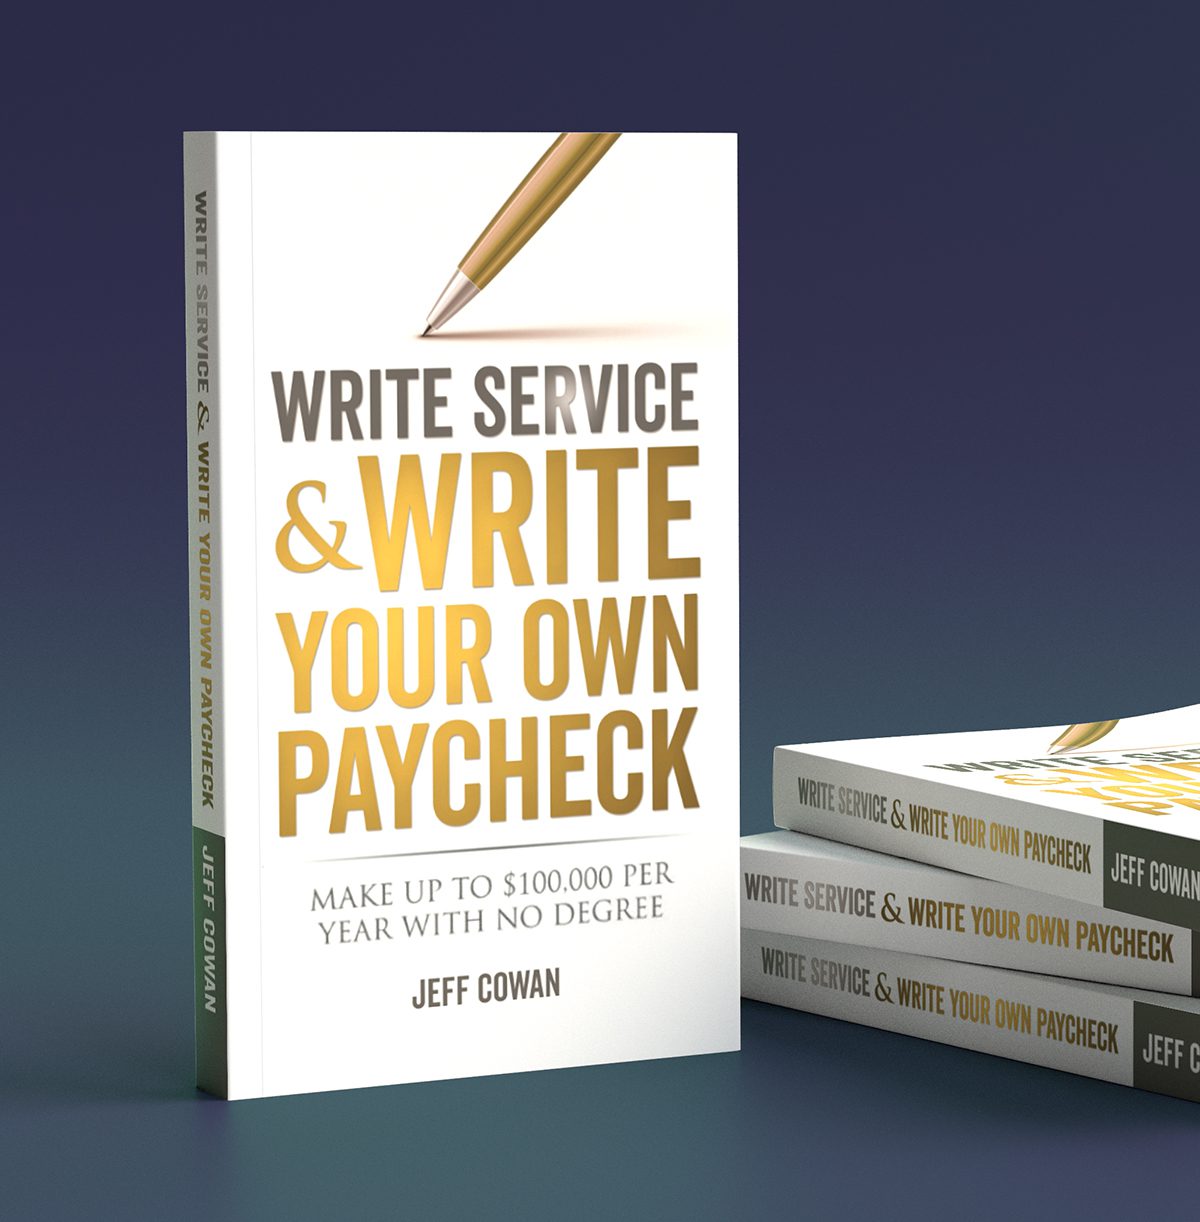 Write Service & Write Your Own Paycheck